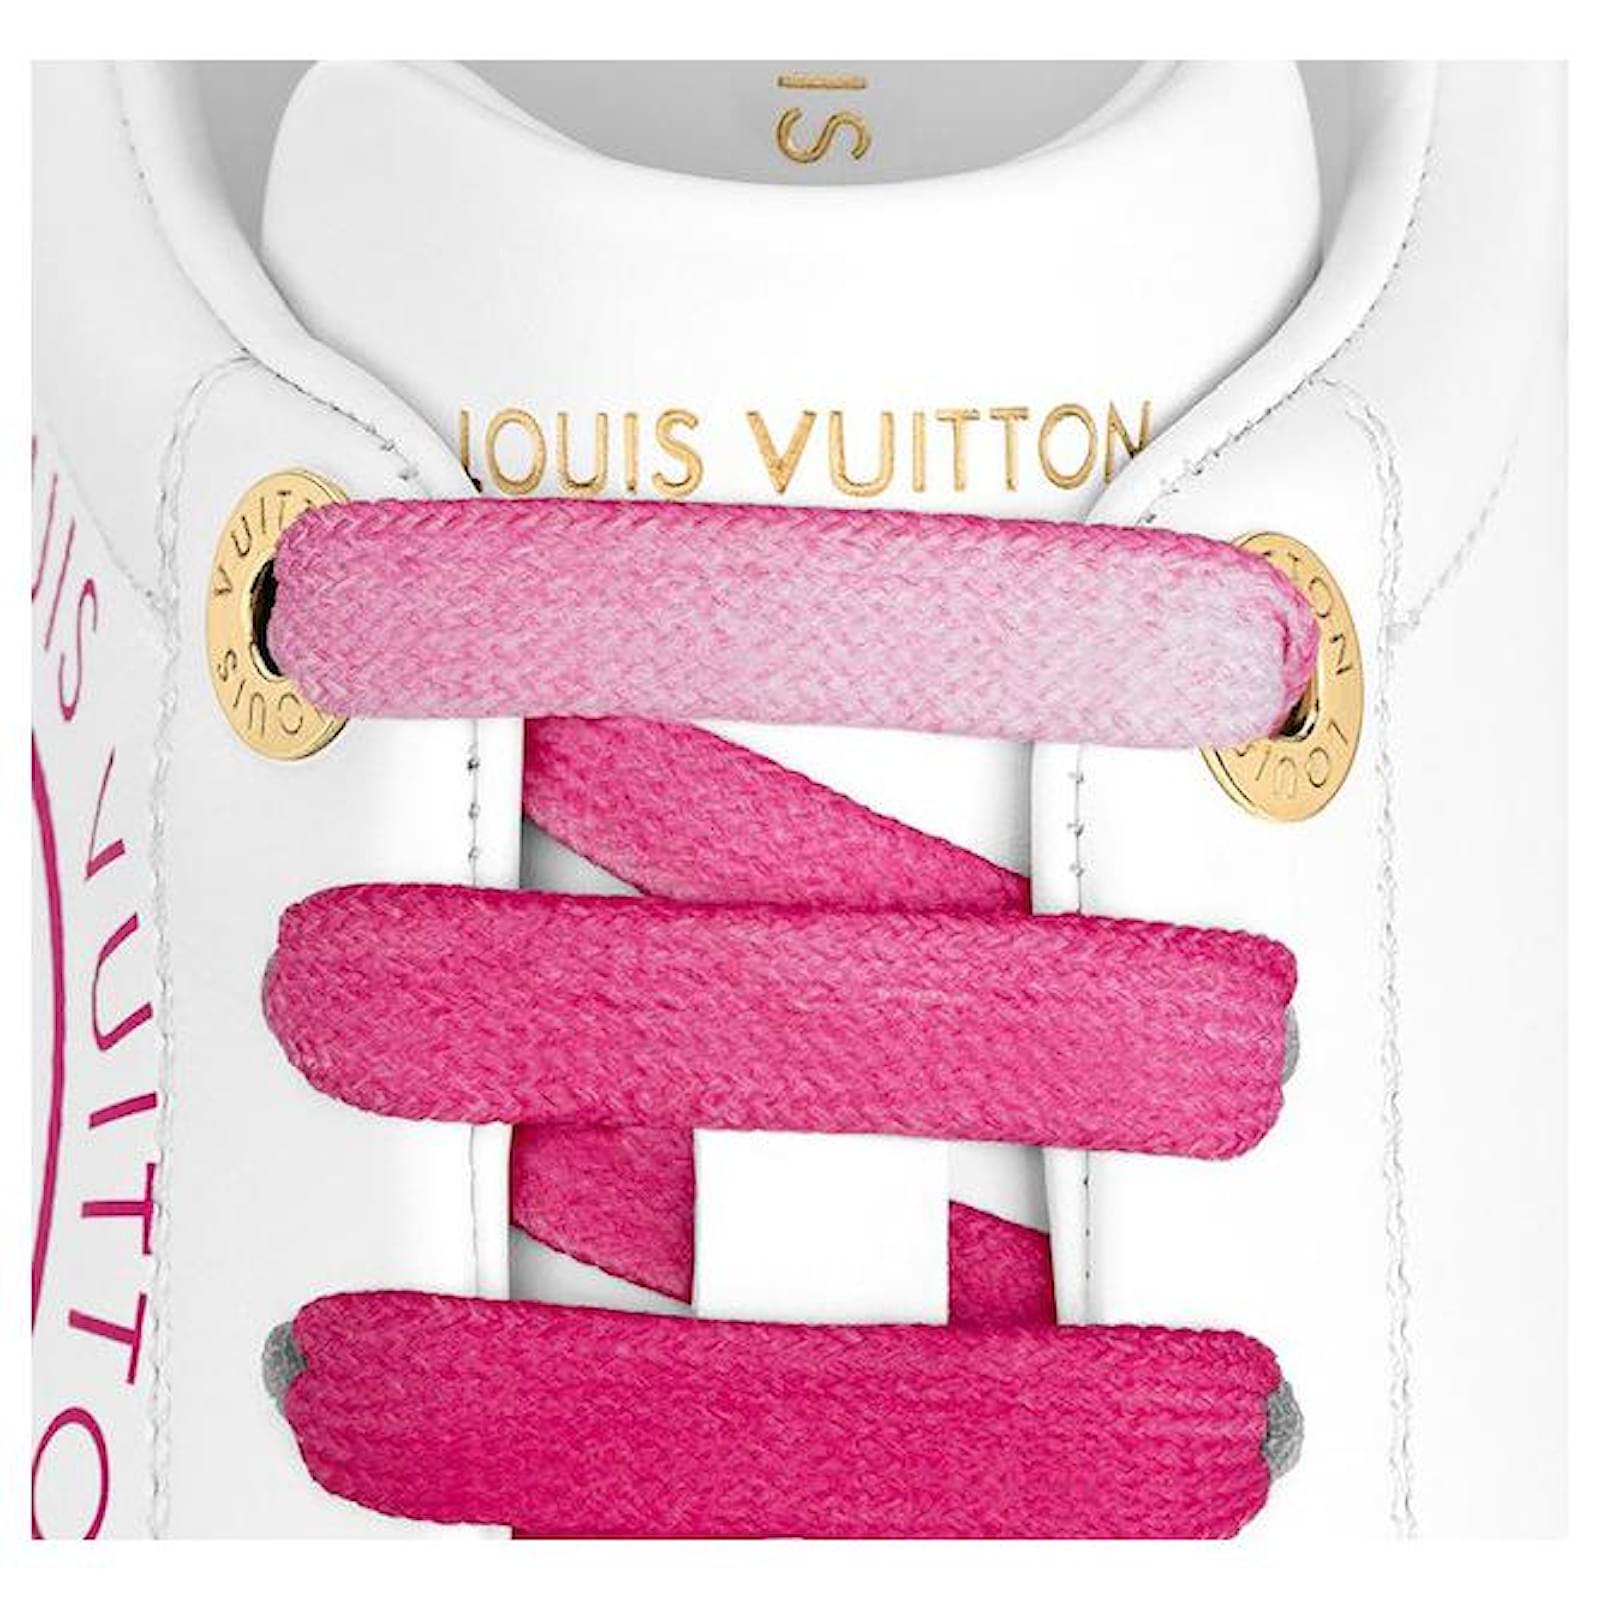 Louis Vuitton Time Out Sneaker, Pink, 40.5